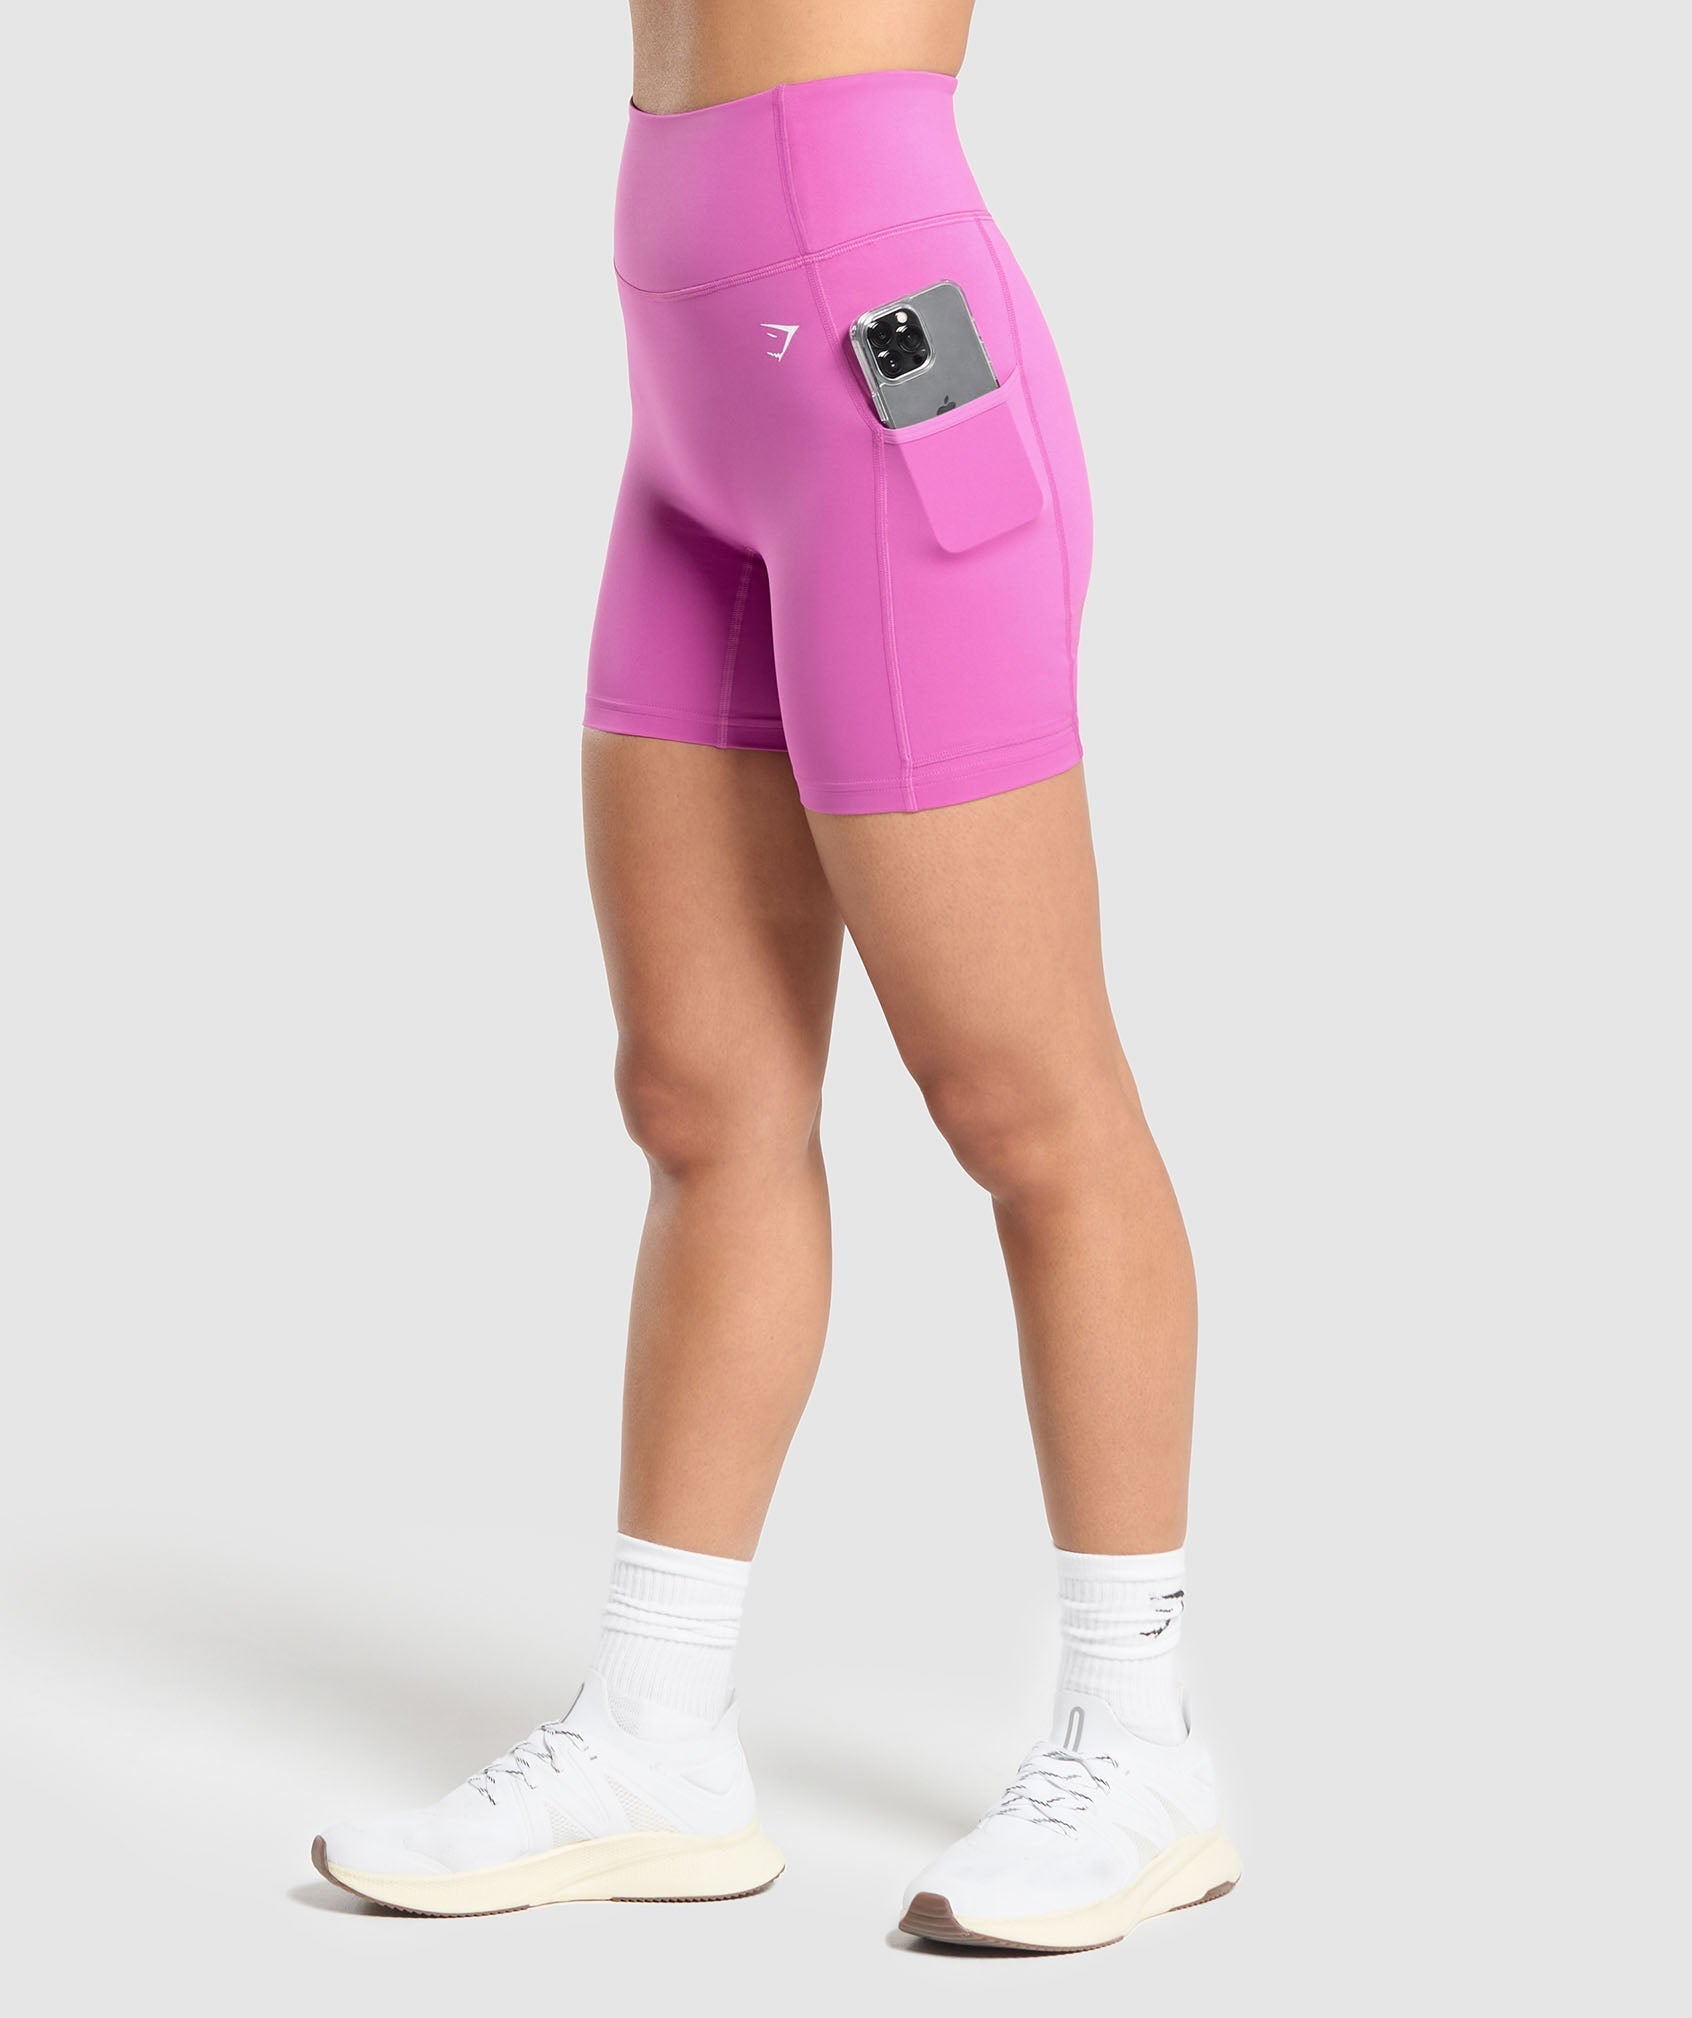 Pocket Shorts in Shelly Pink - view 1